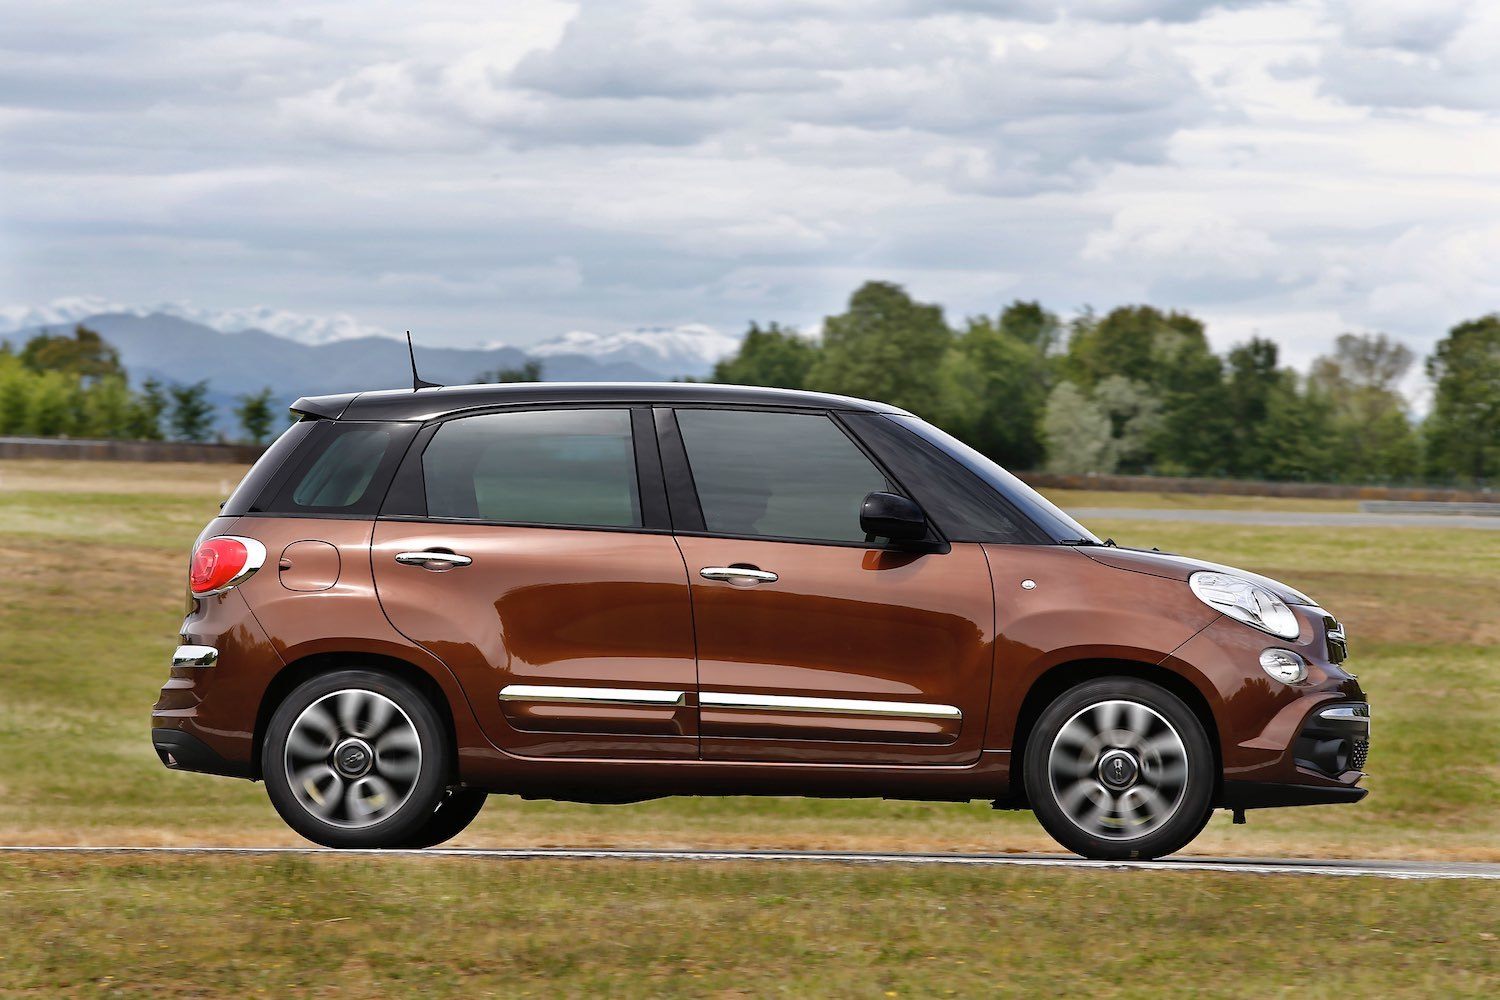 Tim Barnes-Clay reviews the New Fiat 500L from the first drive in Italy 2